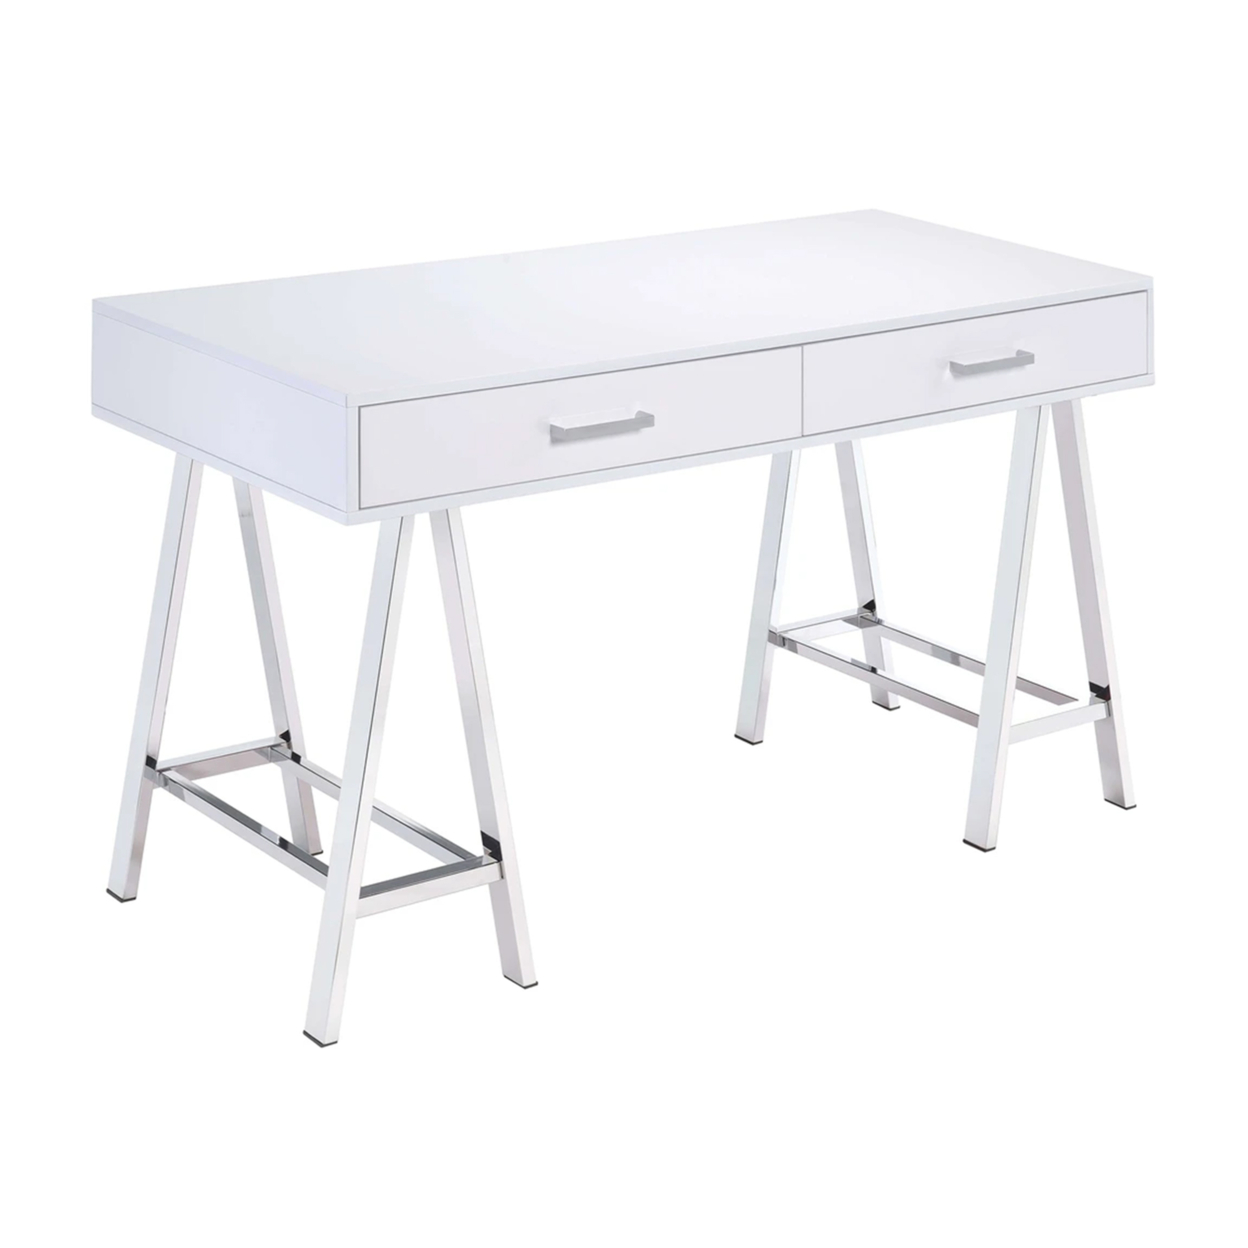 Rectangular Two Drawers Wooden Desk With Saw Horse Metal Legs, Silver And White- Saltoro Sherpi